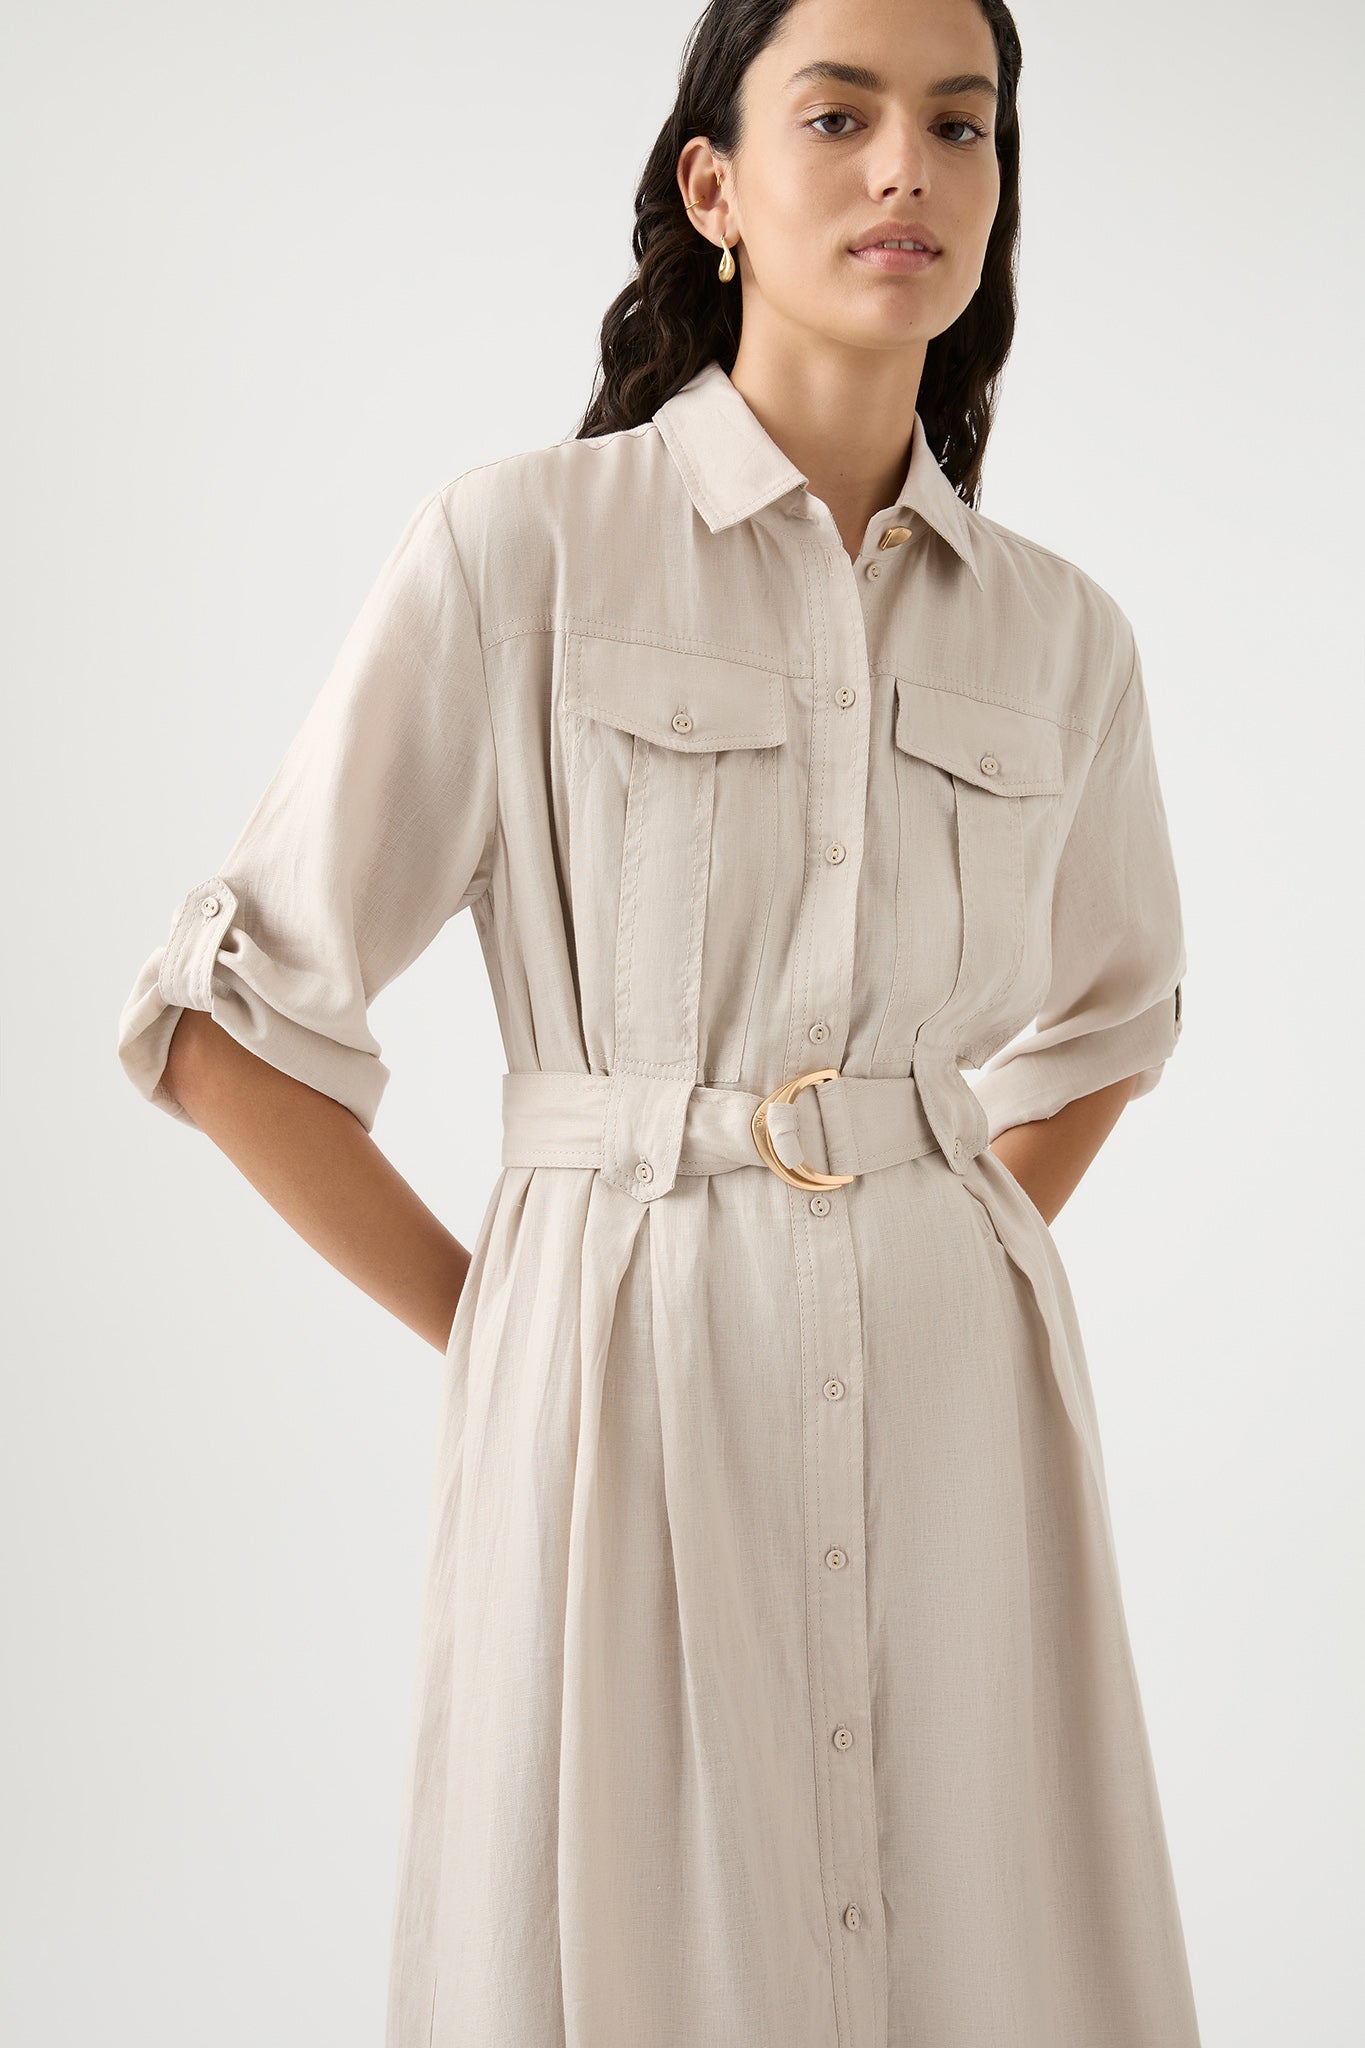 Belted Shirt Dress In Beige - Just $7